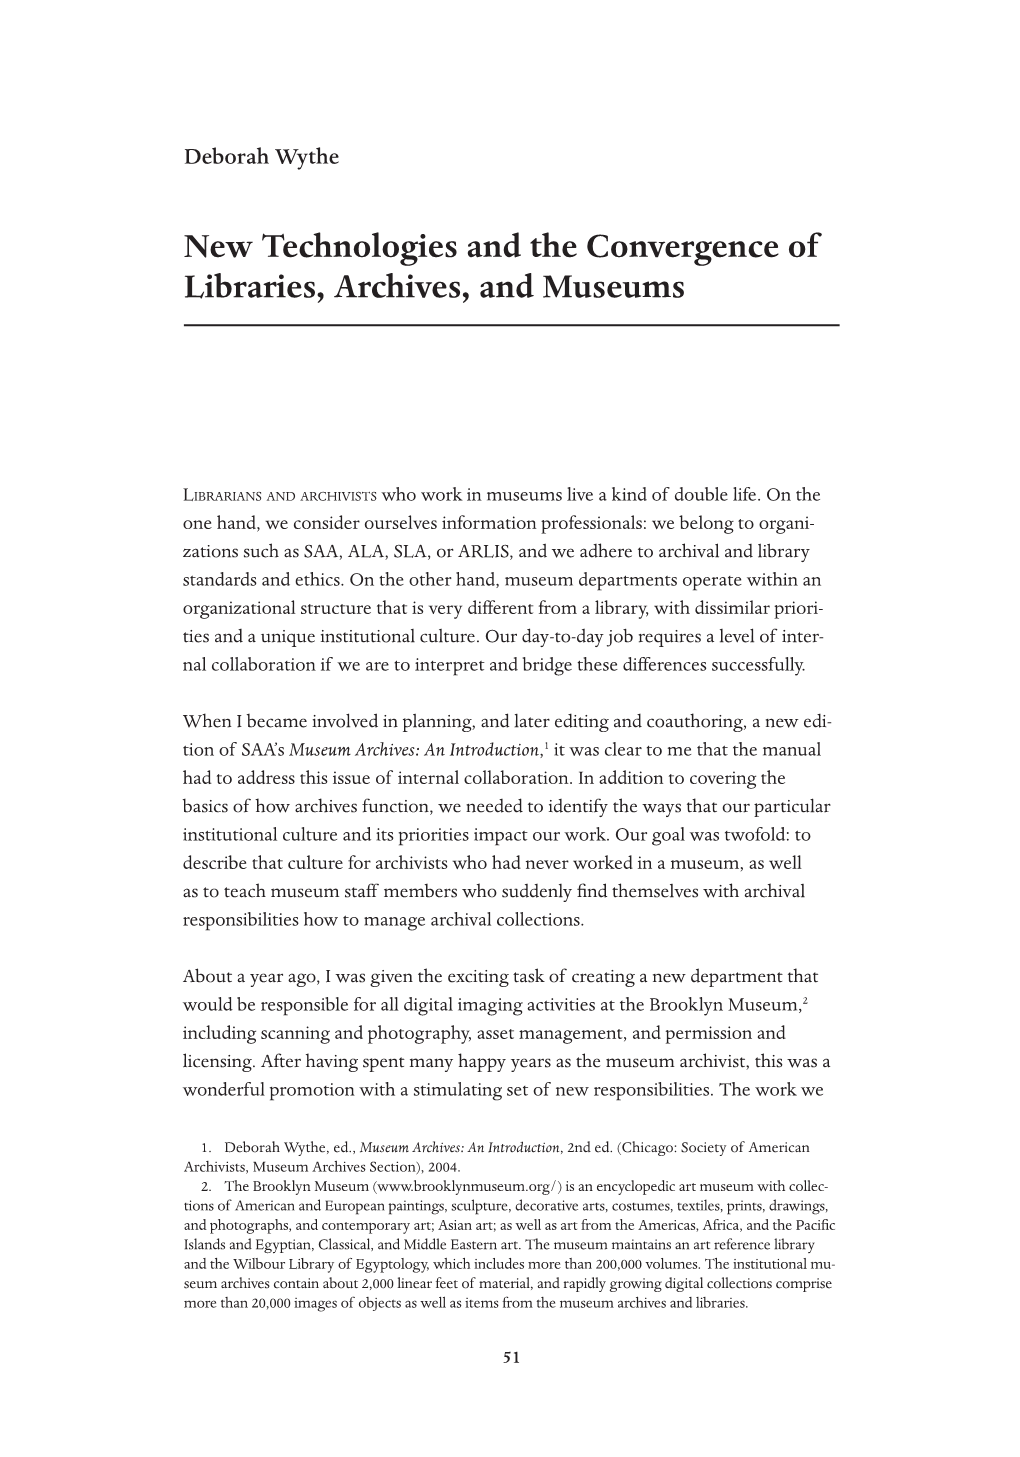 New Technologies and the Convergence of Libraries, Archives, and Museums